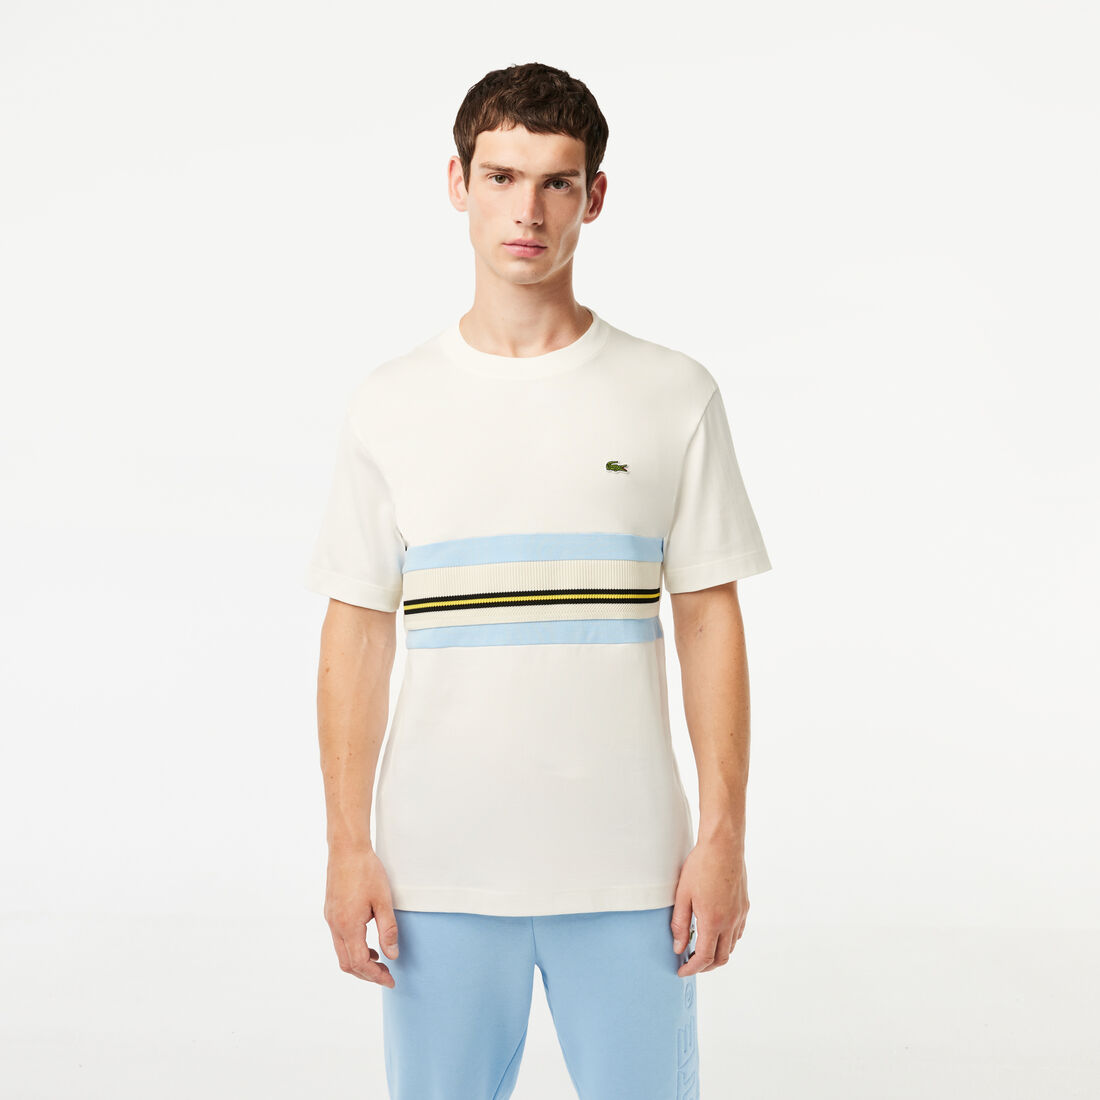 French Made Contrast Stripe Tee - TH1133-00-70V